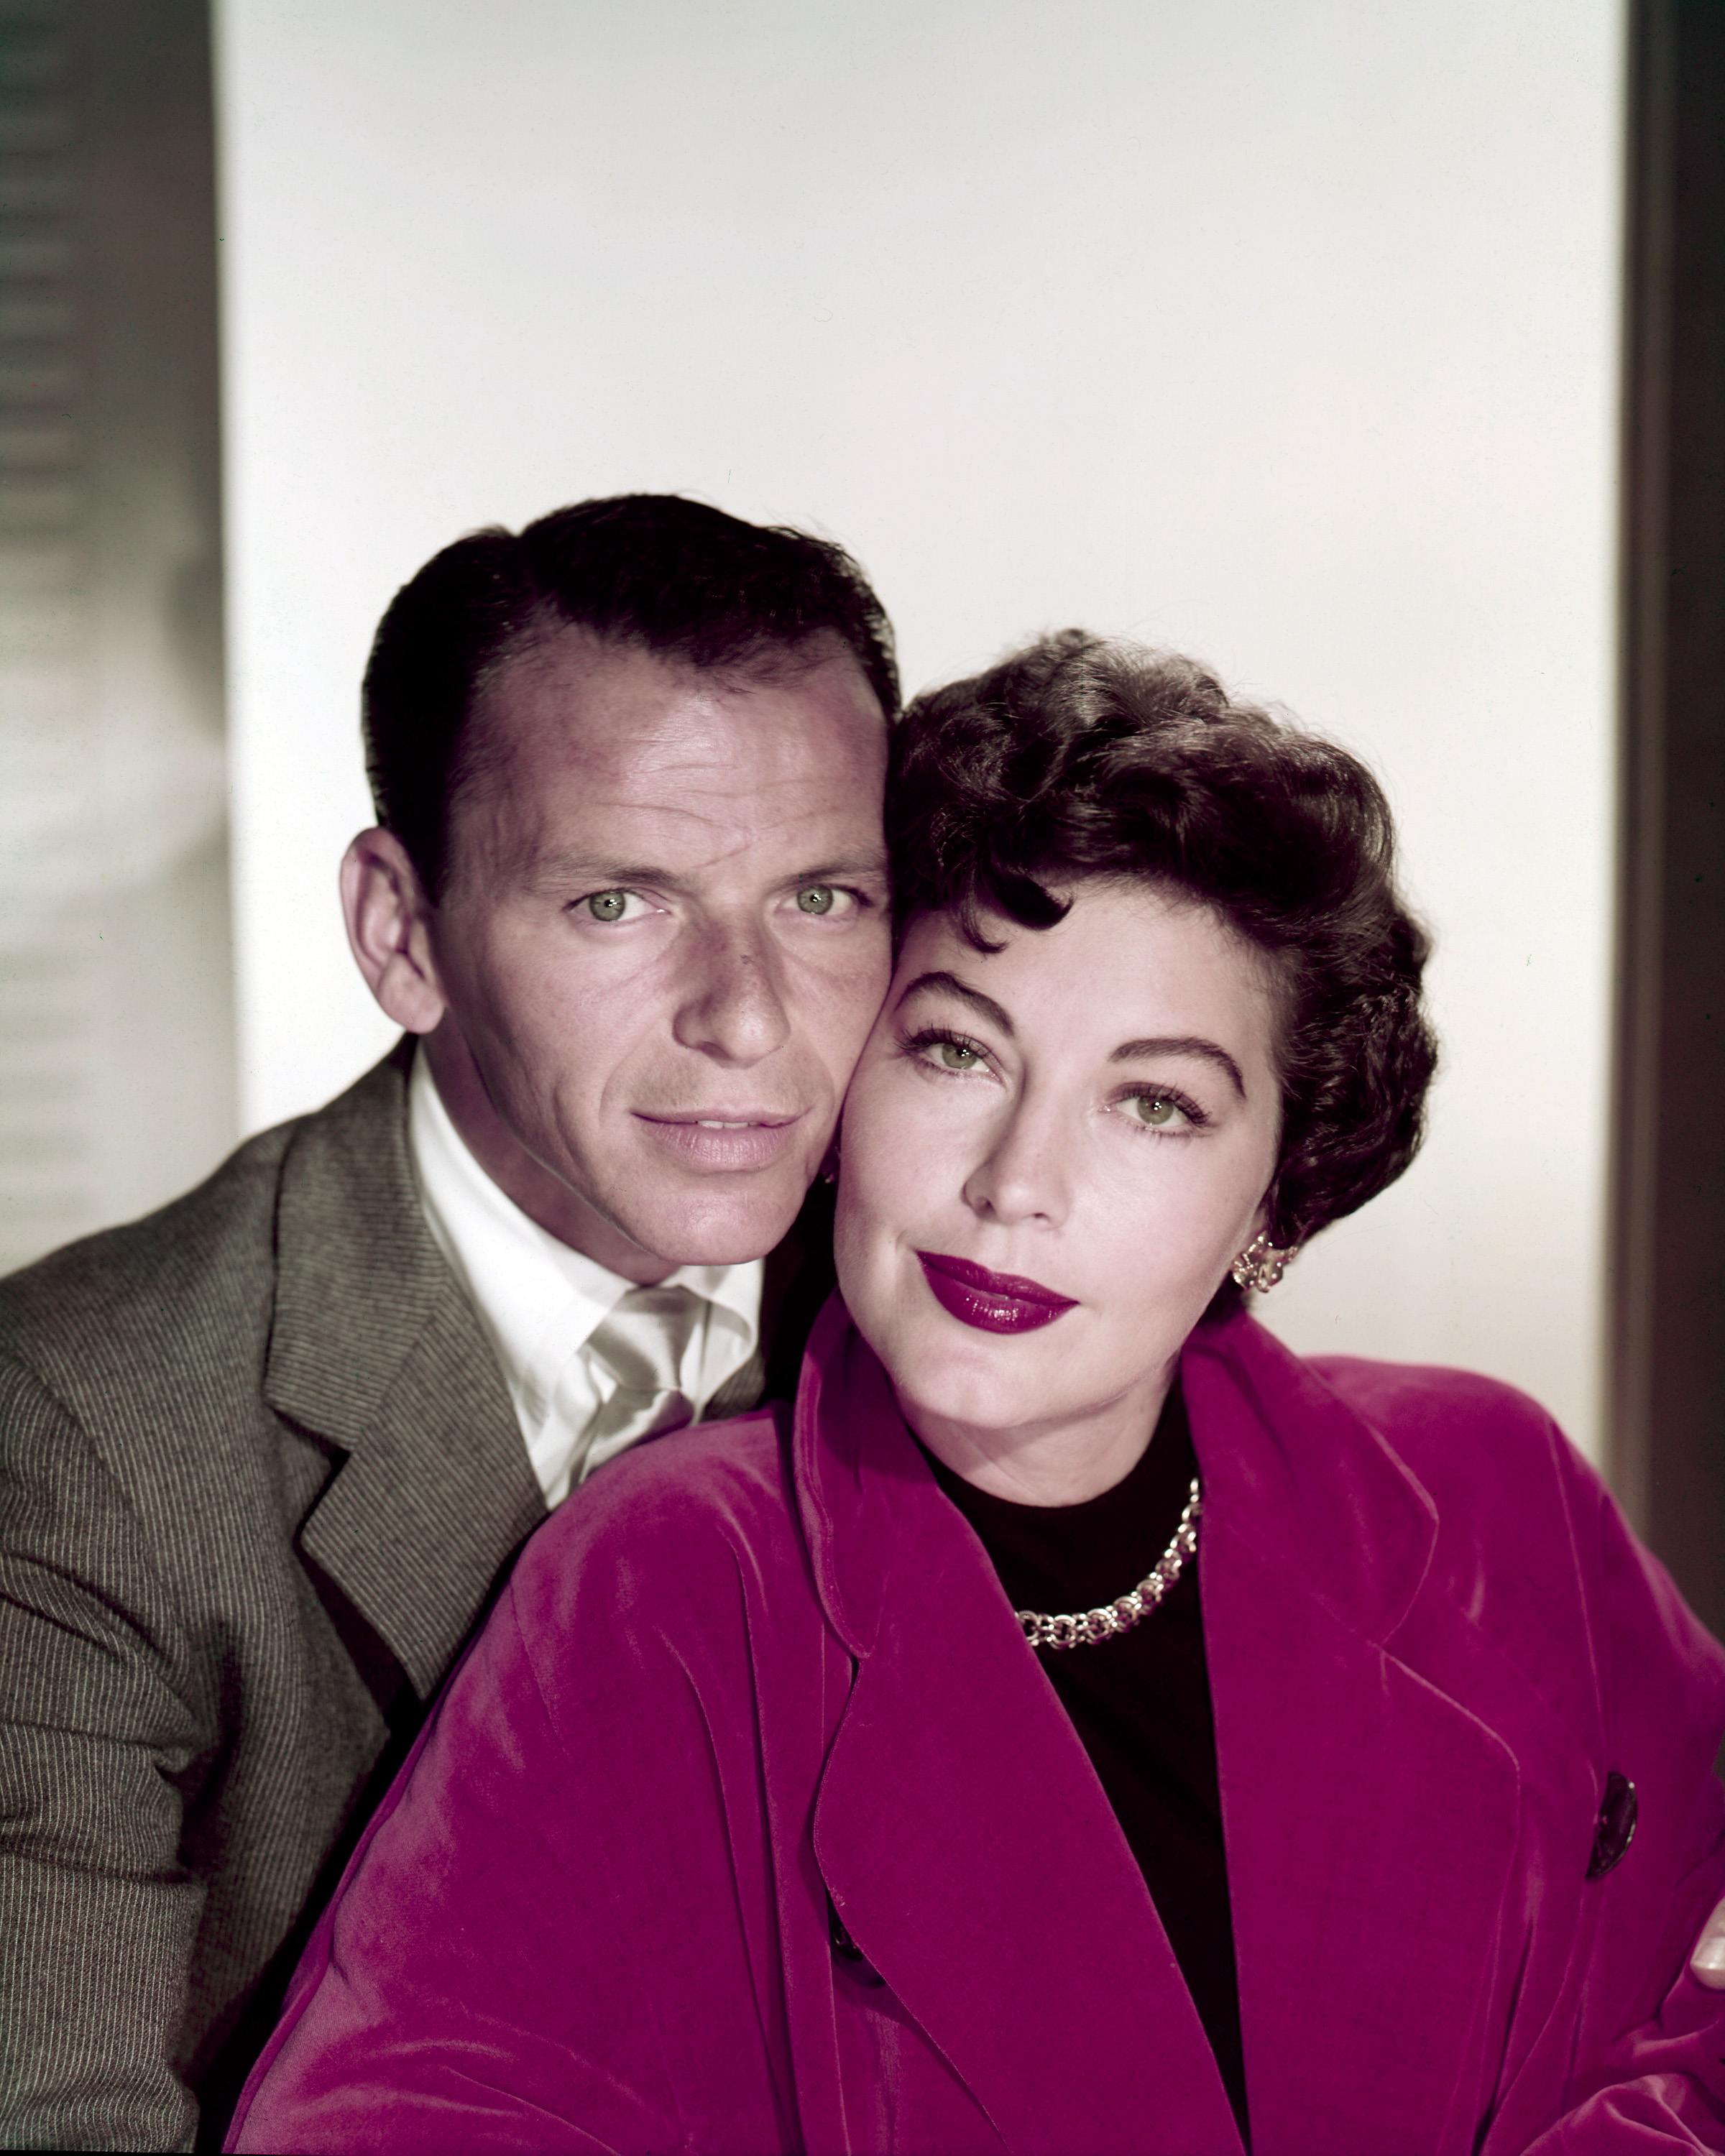 Frank Sinatra and Ava Gardner, circa 1953 | Source: Getty Images